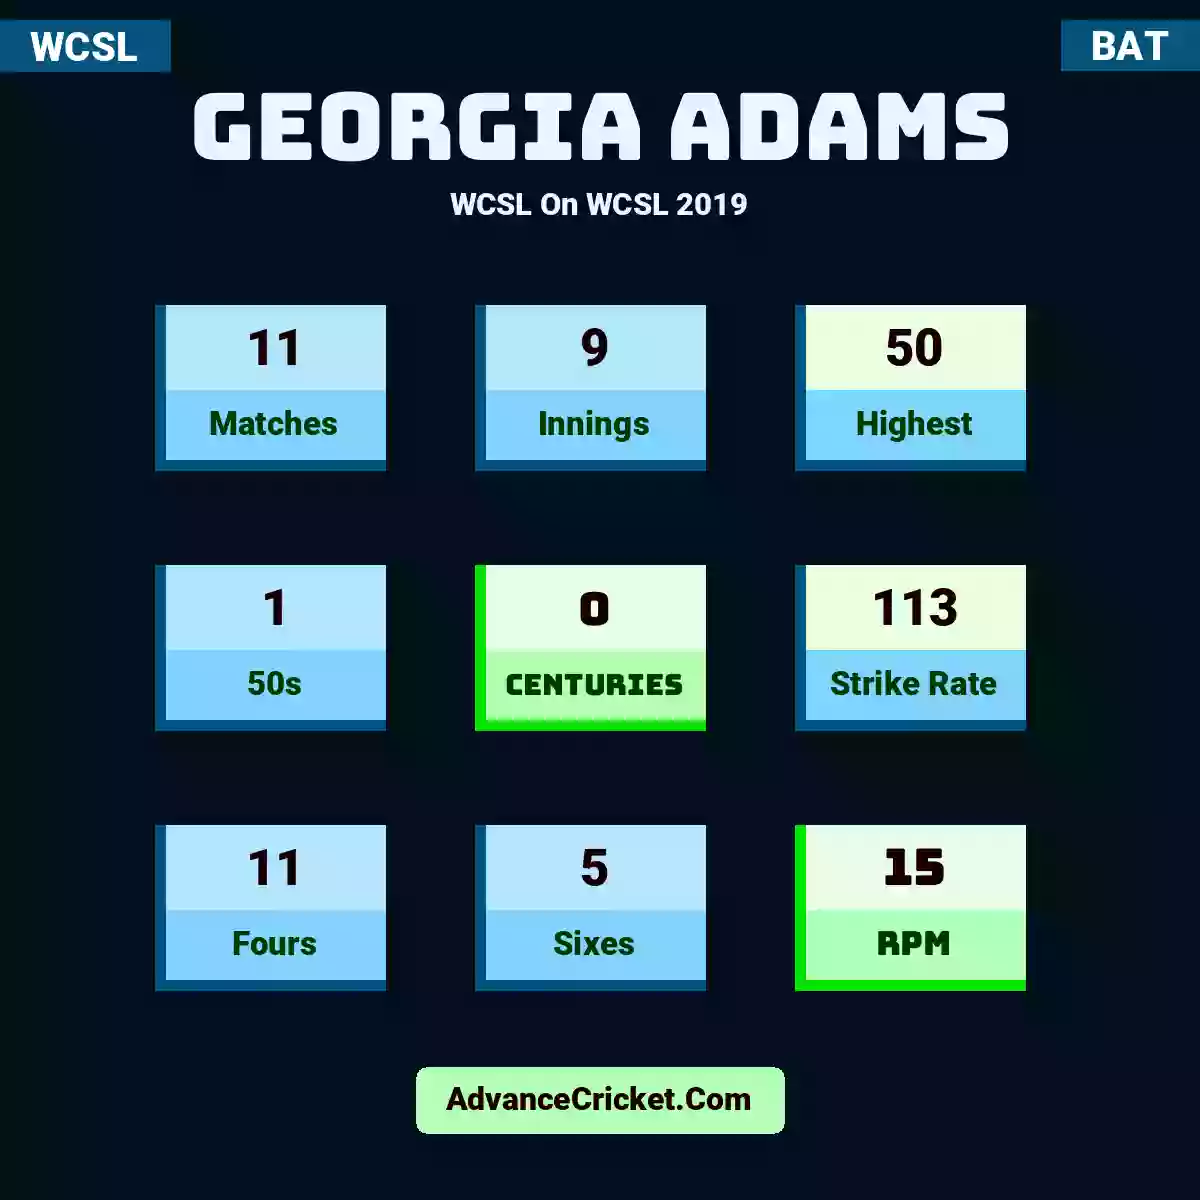 Georgia Adams WCSL  On WCSL 2019, Georgia Adams played 11 matches, scored 50 runs as highest, 1 half-centuries, and 0 centuries, with a strike rate of 113. G.Adams hit 11 fours and 5 sixes, with an RPM of 15.